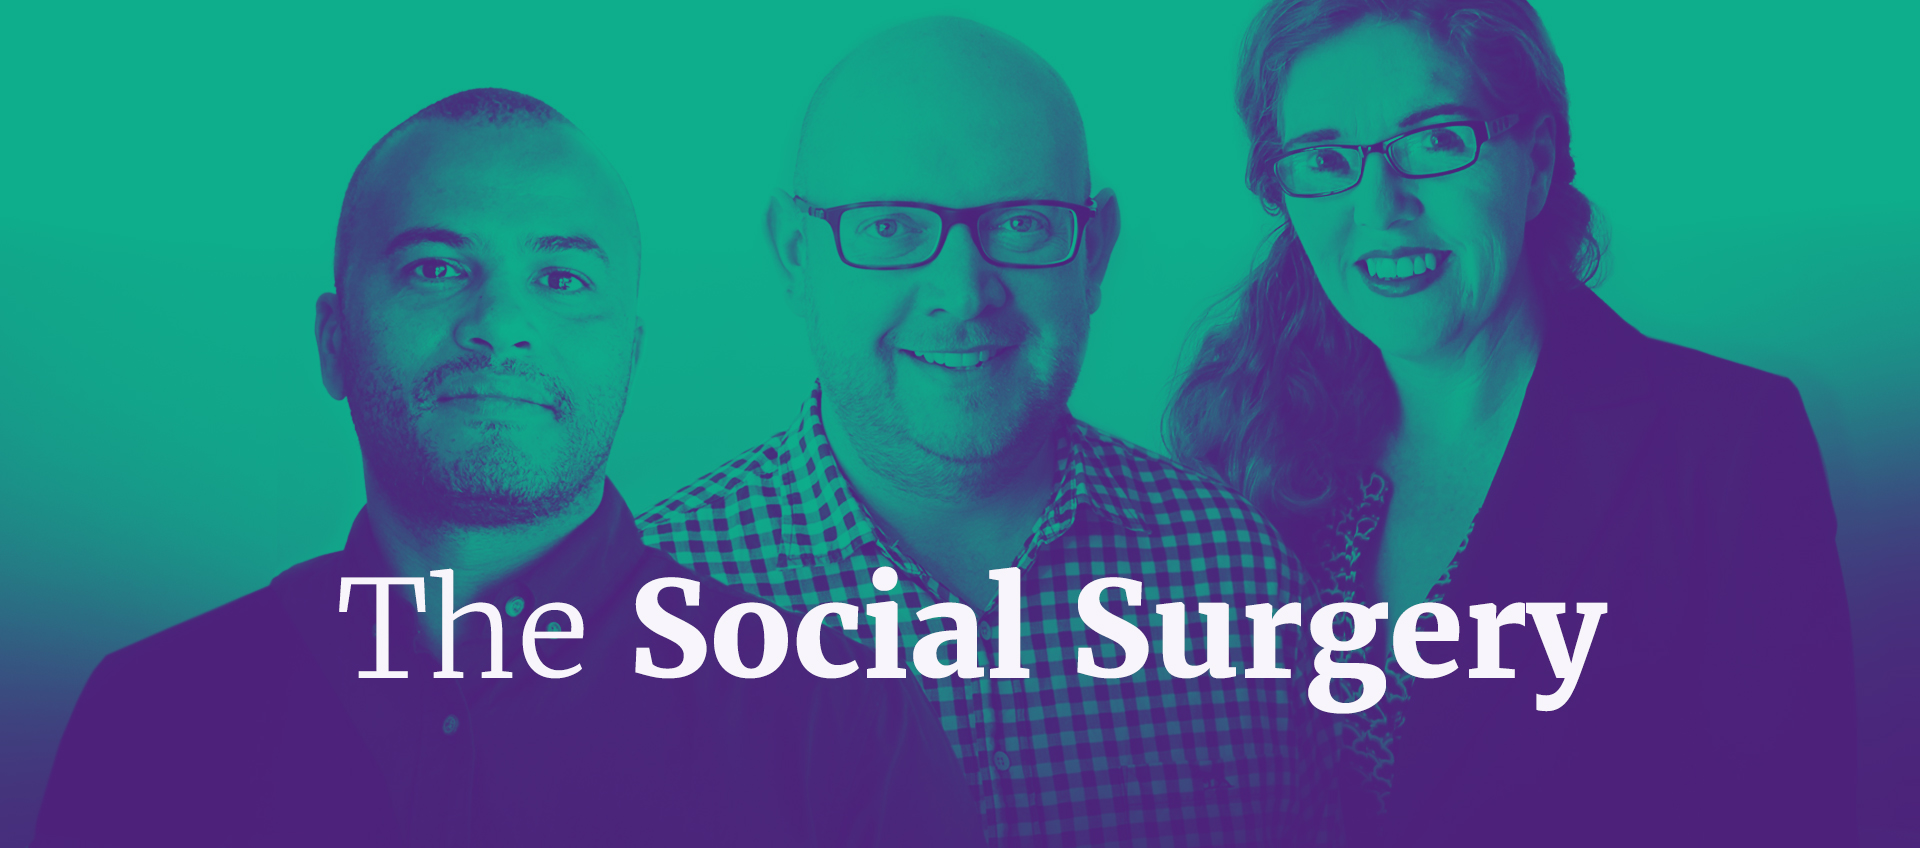 The Social Surgery Podcast